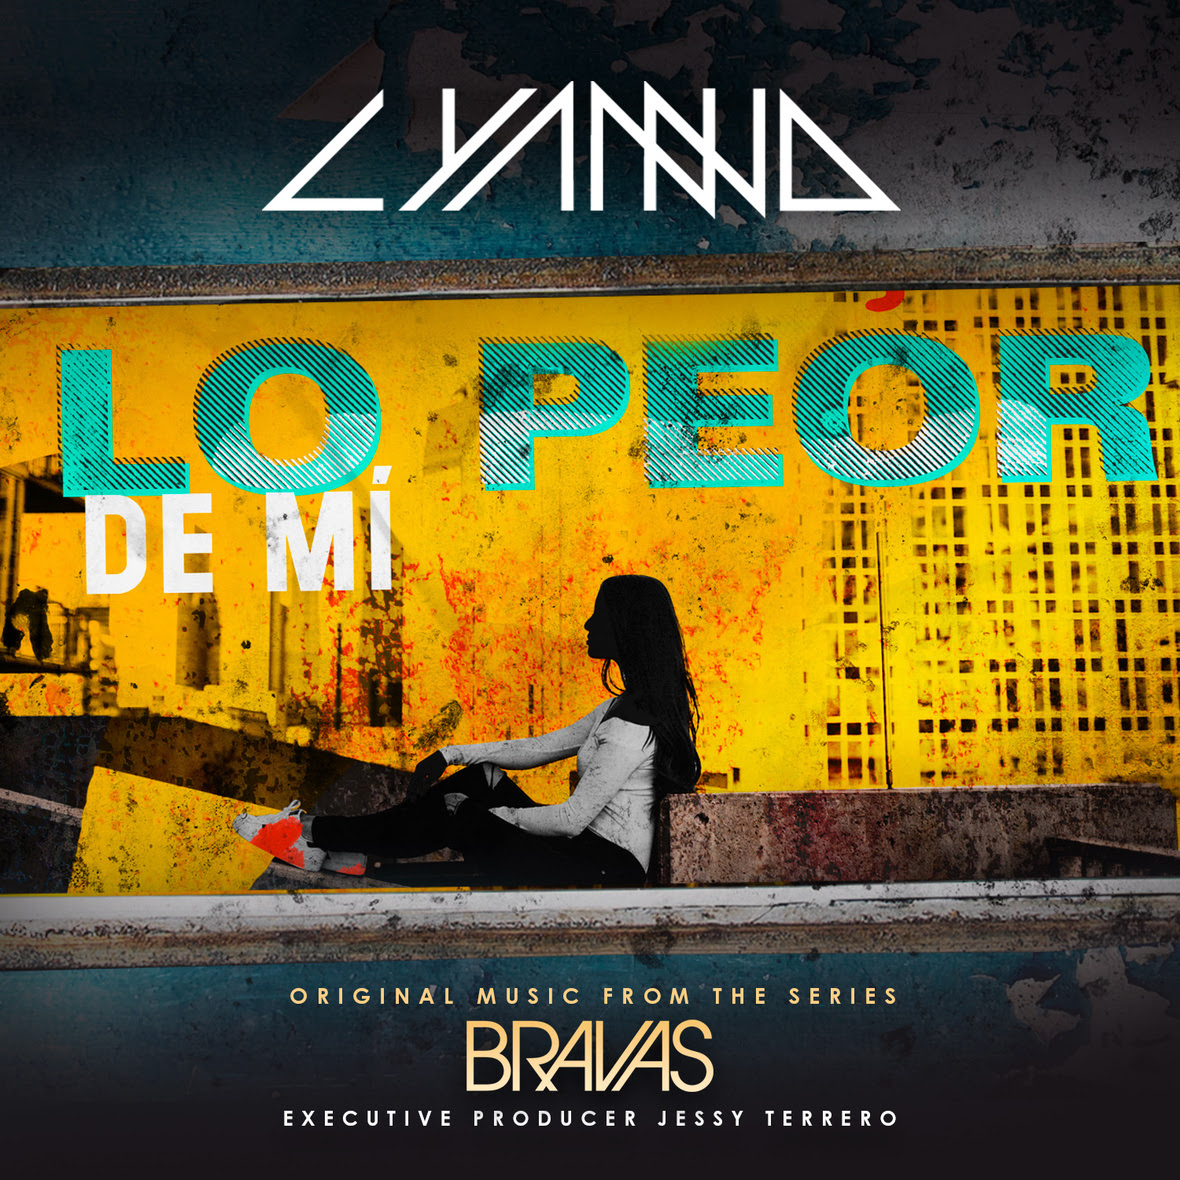 Warner Music Latina releases “Lo Peor De MI” with Lyanno, the first single from BRAVAS, a YouTube Originals series